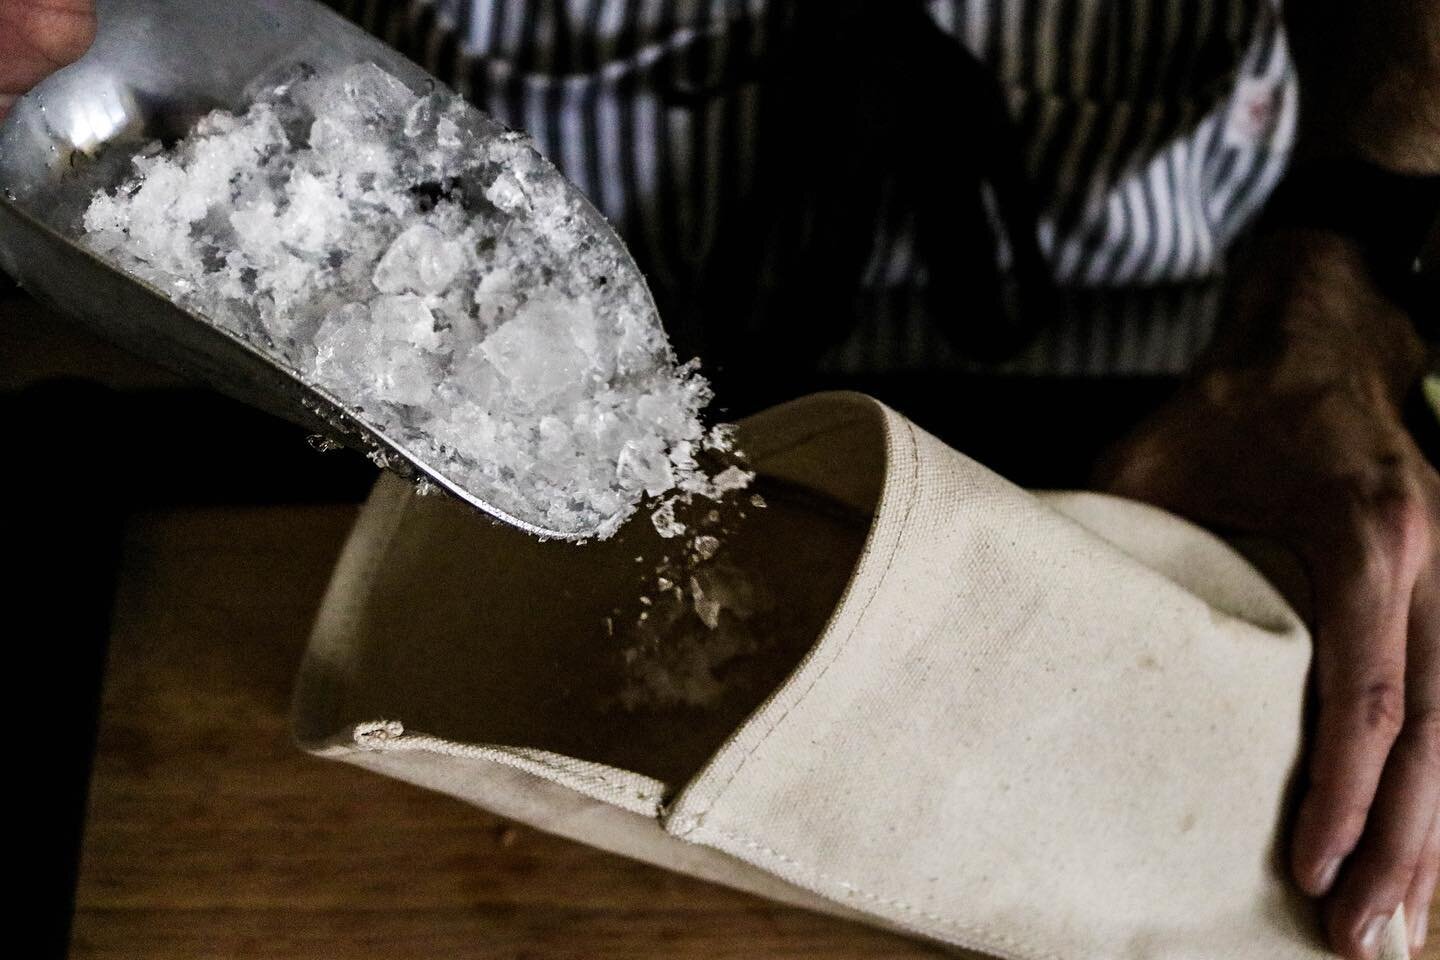 Ice. It's one of the most essential aspects of a cocktail, but can be one of the most overlooked. Whether it's a big, clear cube served under your favorite liquor, or a mound of crushed ice on top of a mojito, ice is imperative to enjoying a deliciou